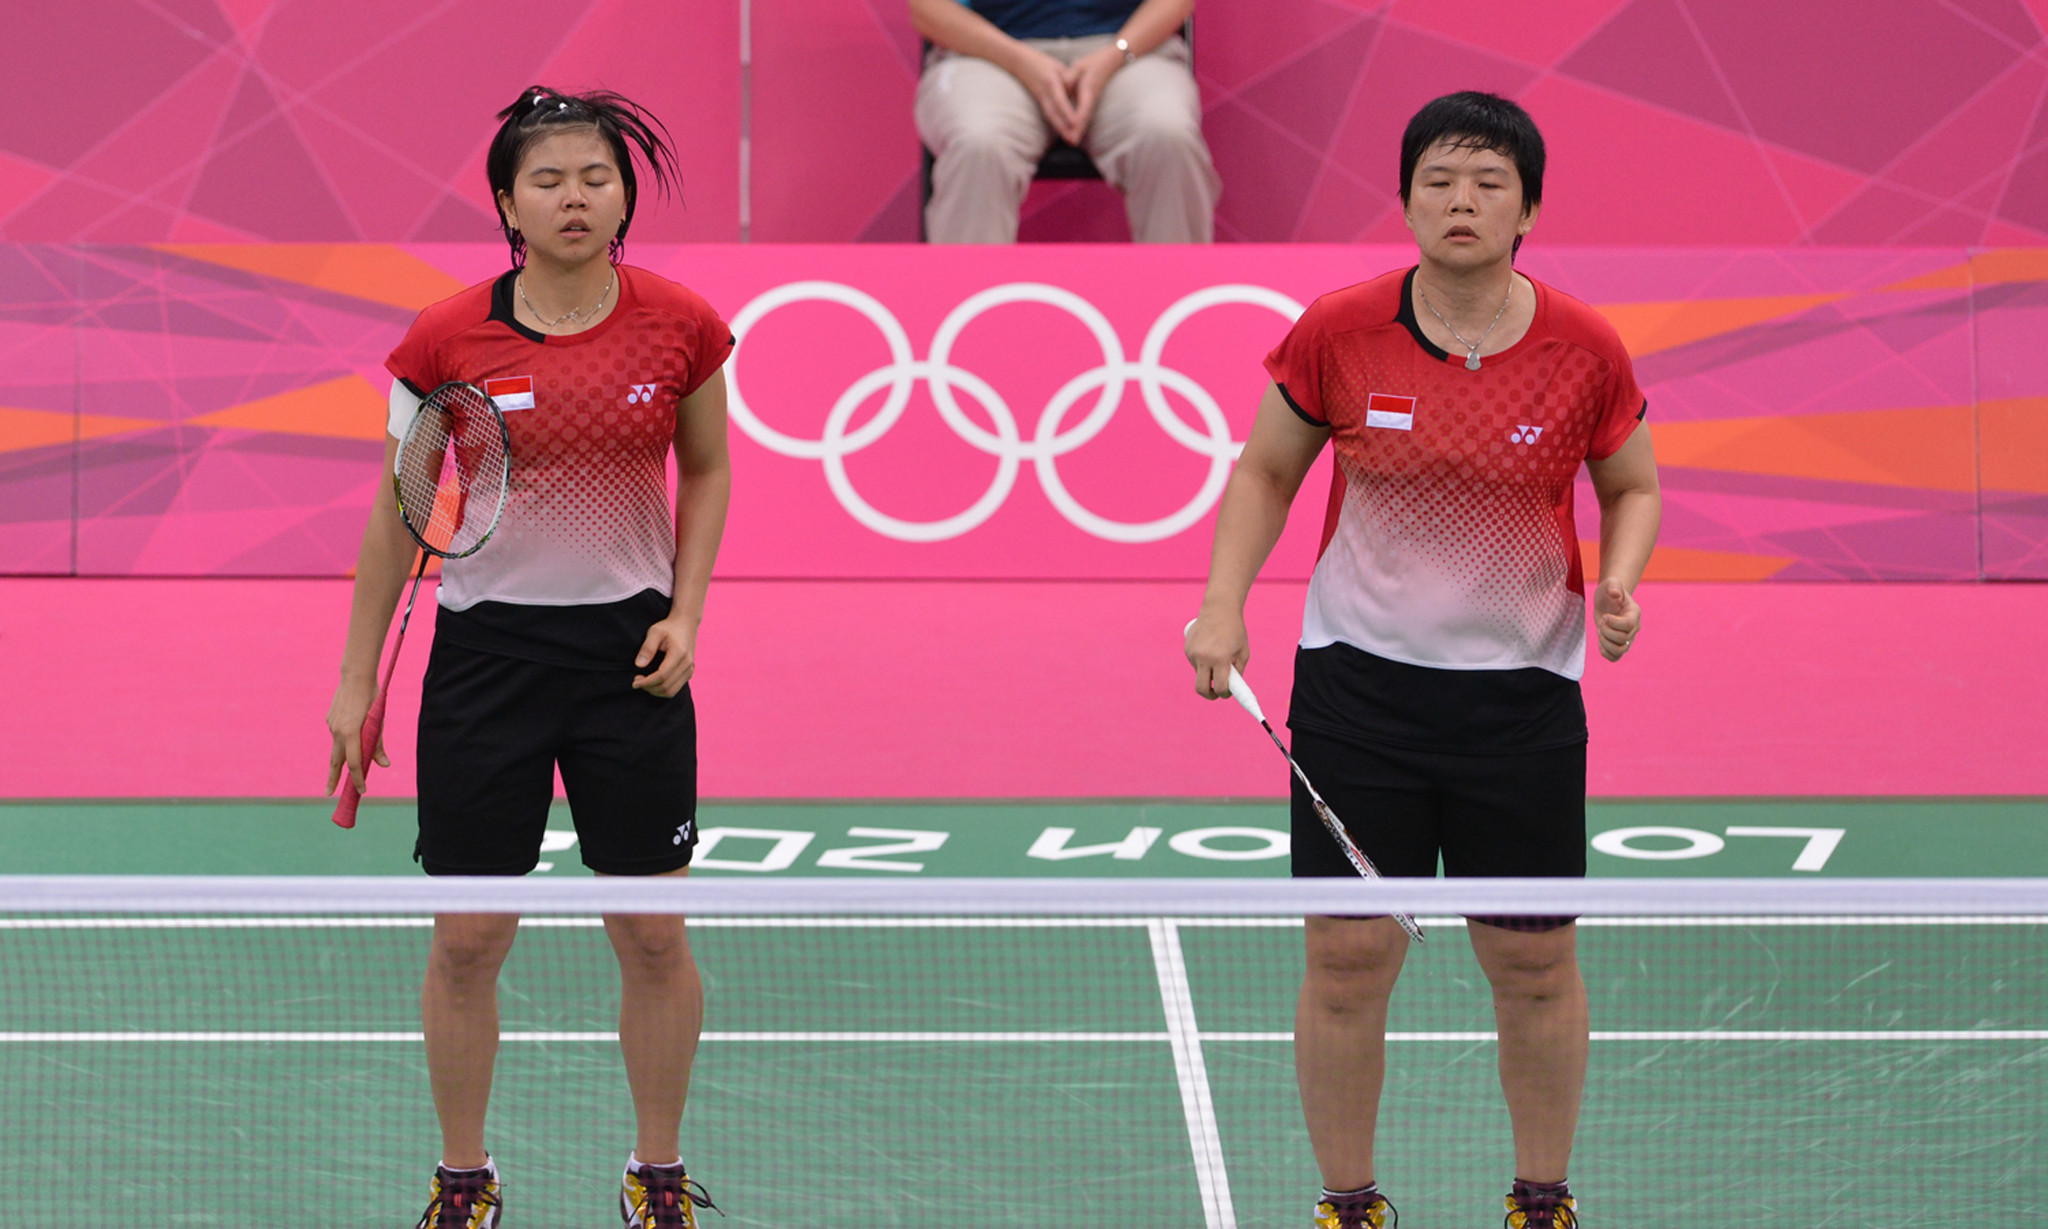 Greysia Polii, left, and Meiliana Jauhari, right, were involved in a disputed match at London 2012 ©Getty Images